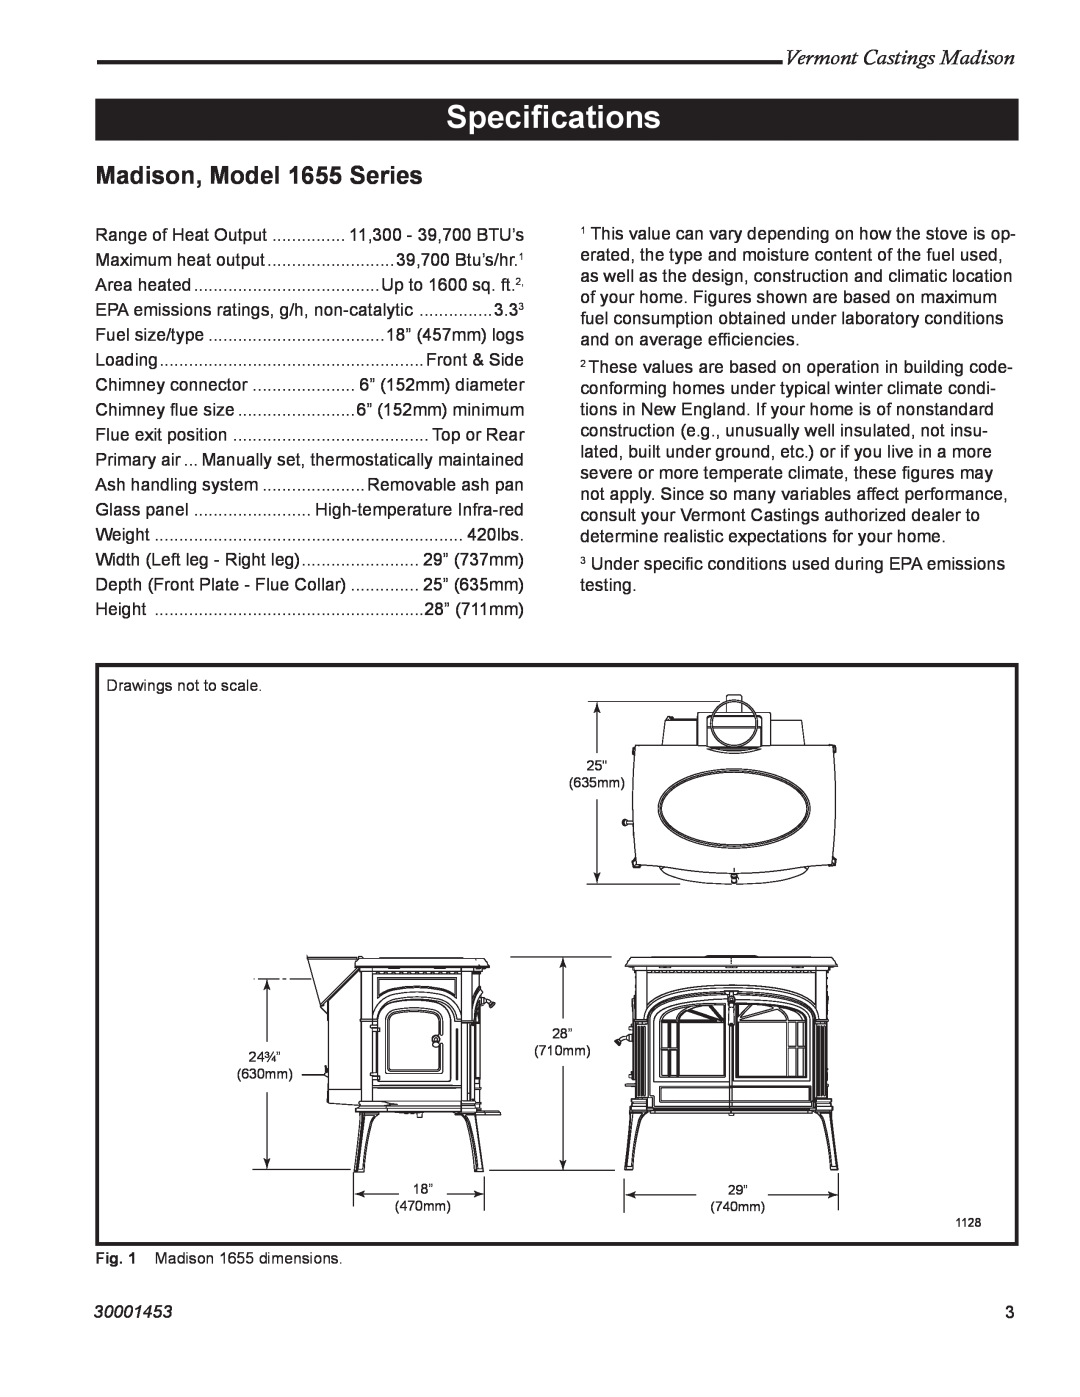 Vermont Casting 1657, 1659, 1656, 1658 Speciﬁcations, Madison, Model 1655 Series, Vermont Castings Madison, 30001453 